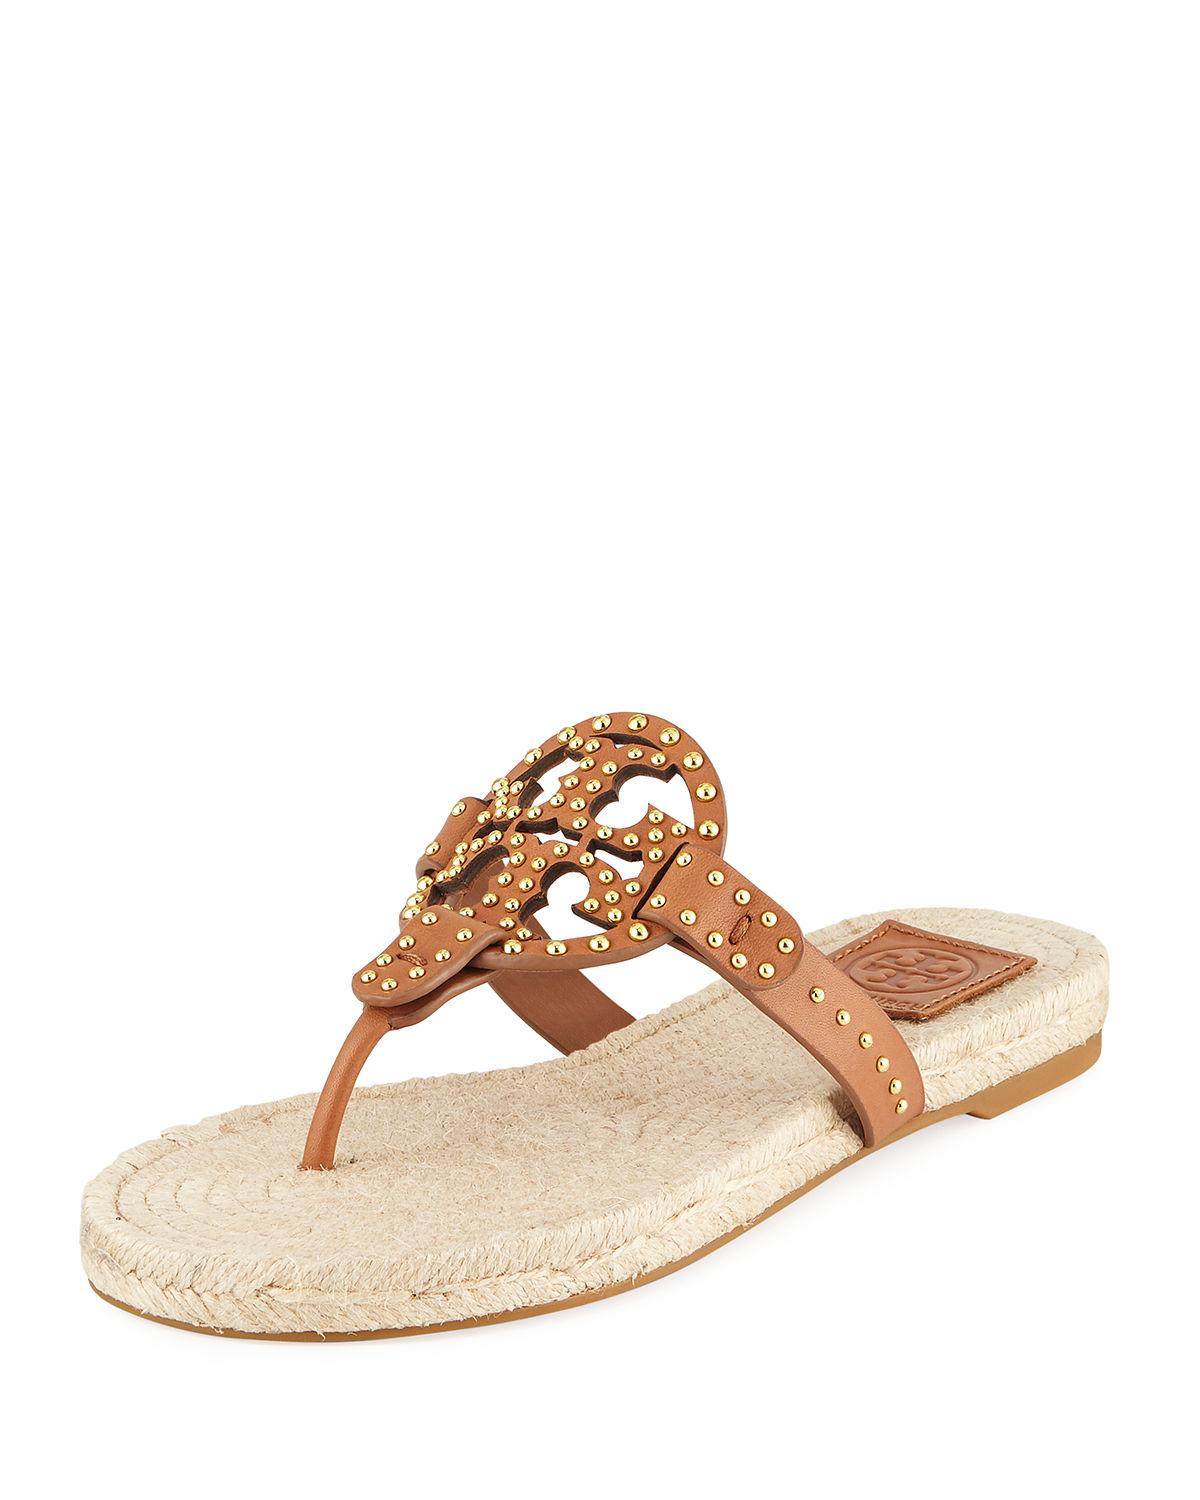 Lyst - Tory Burch Miller Studded Leather Espadrille Sandals in Brown